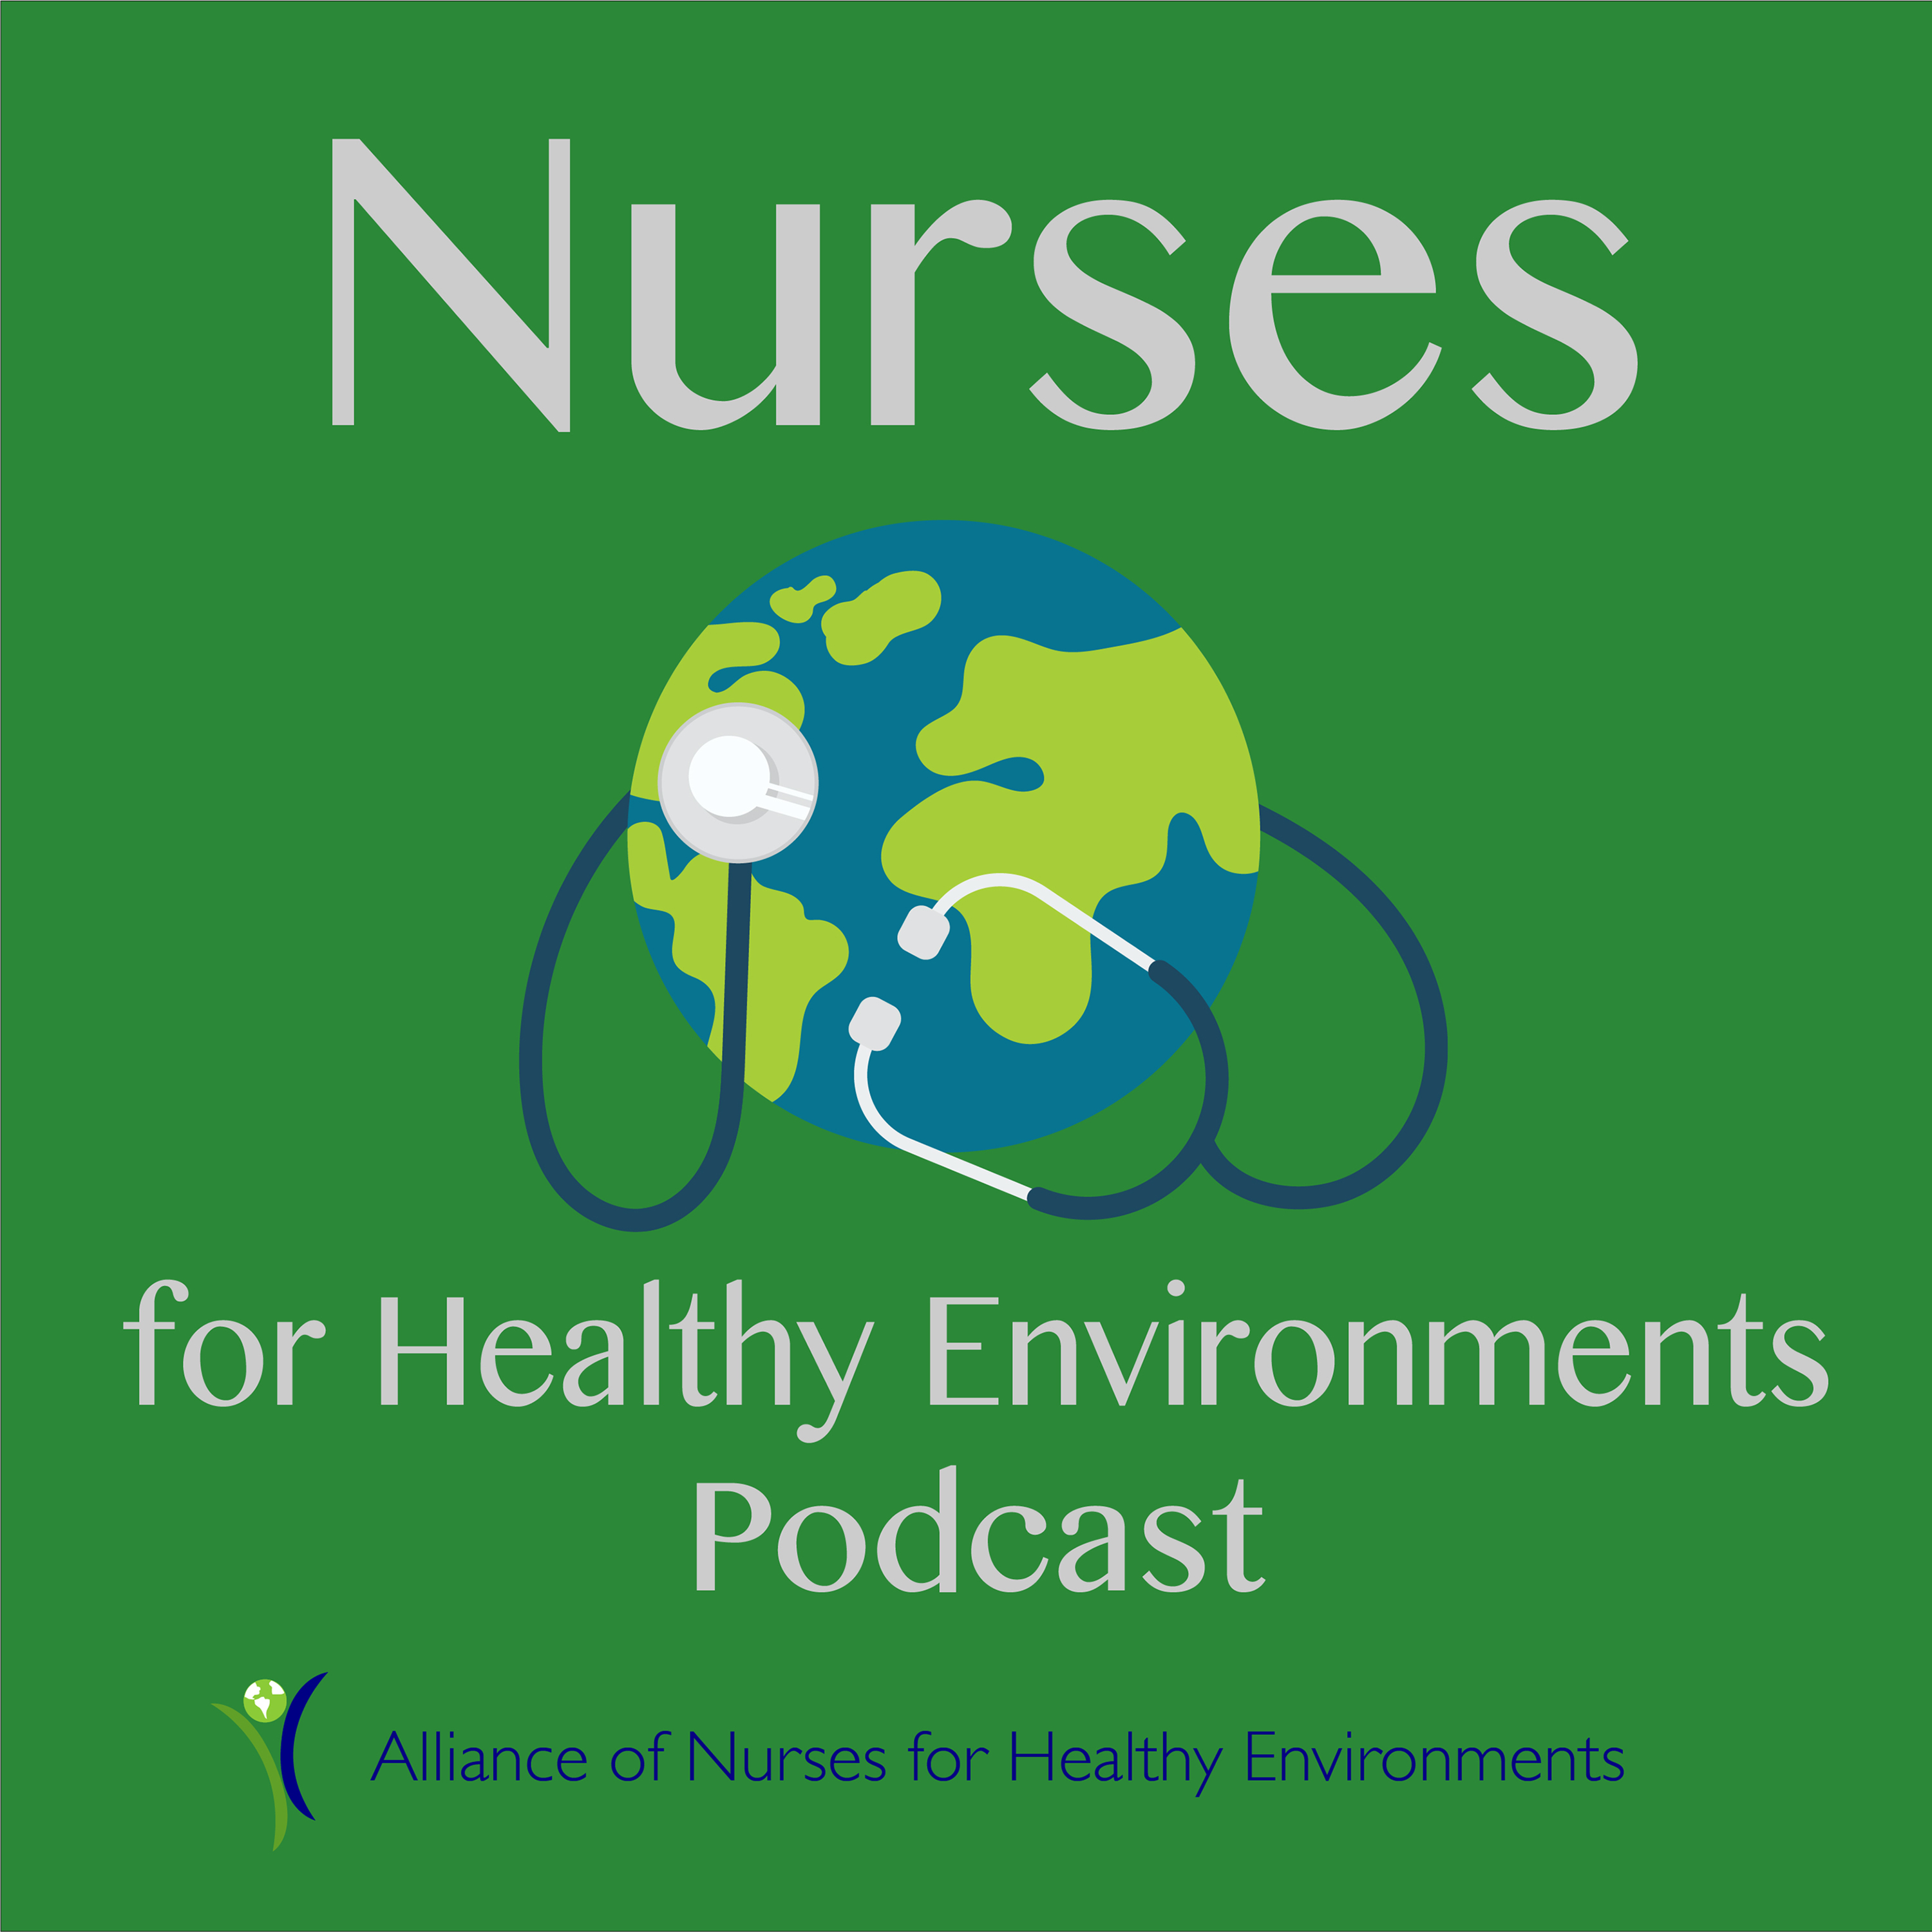 Nurses for Healthy Environments Podcast